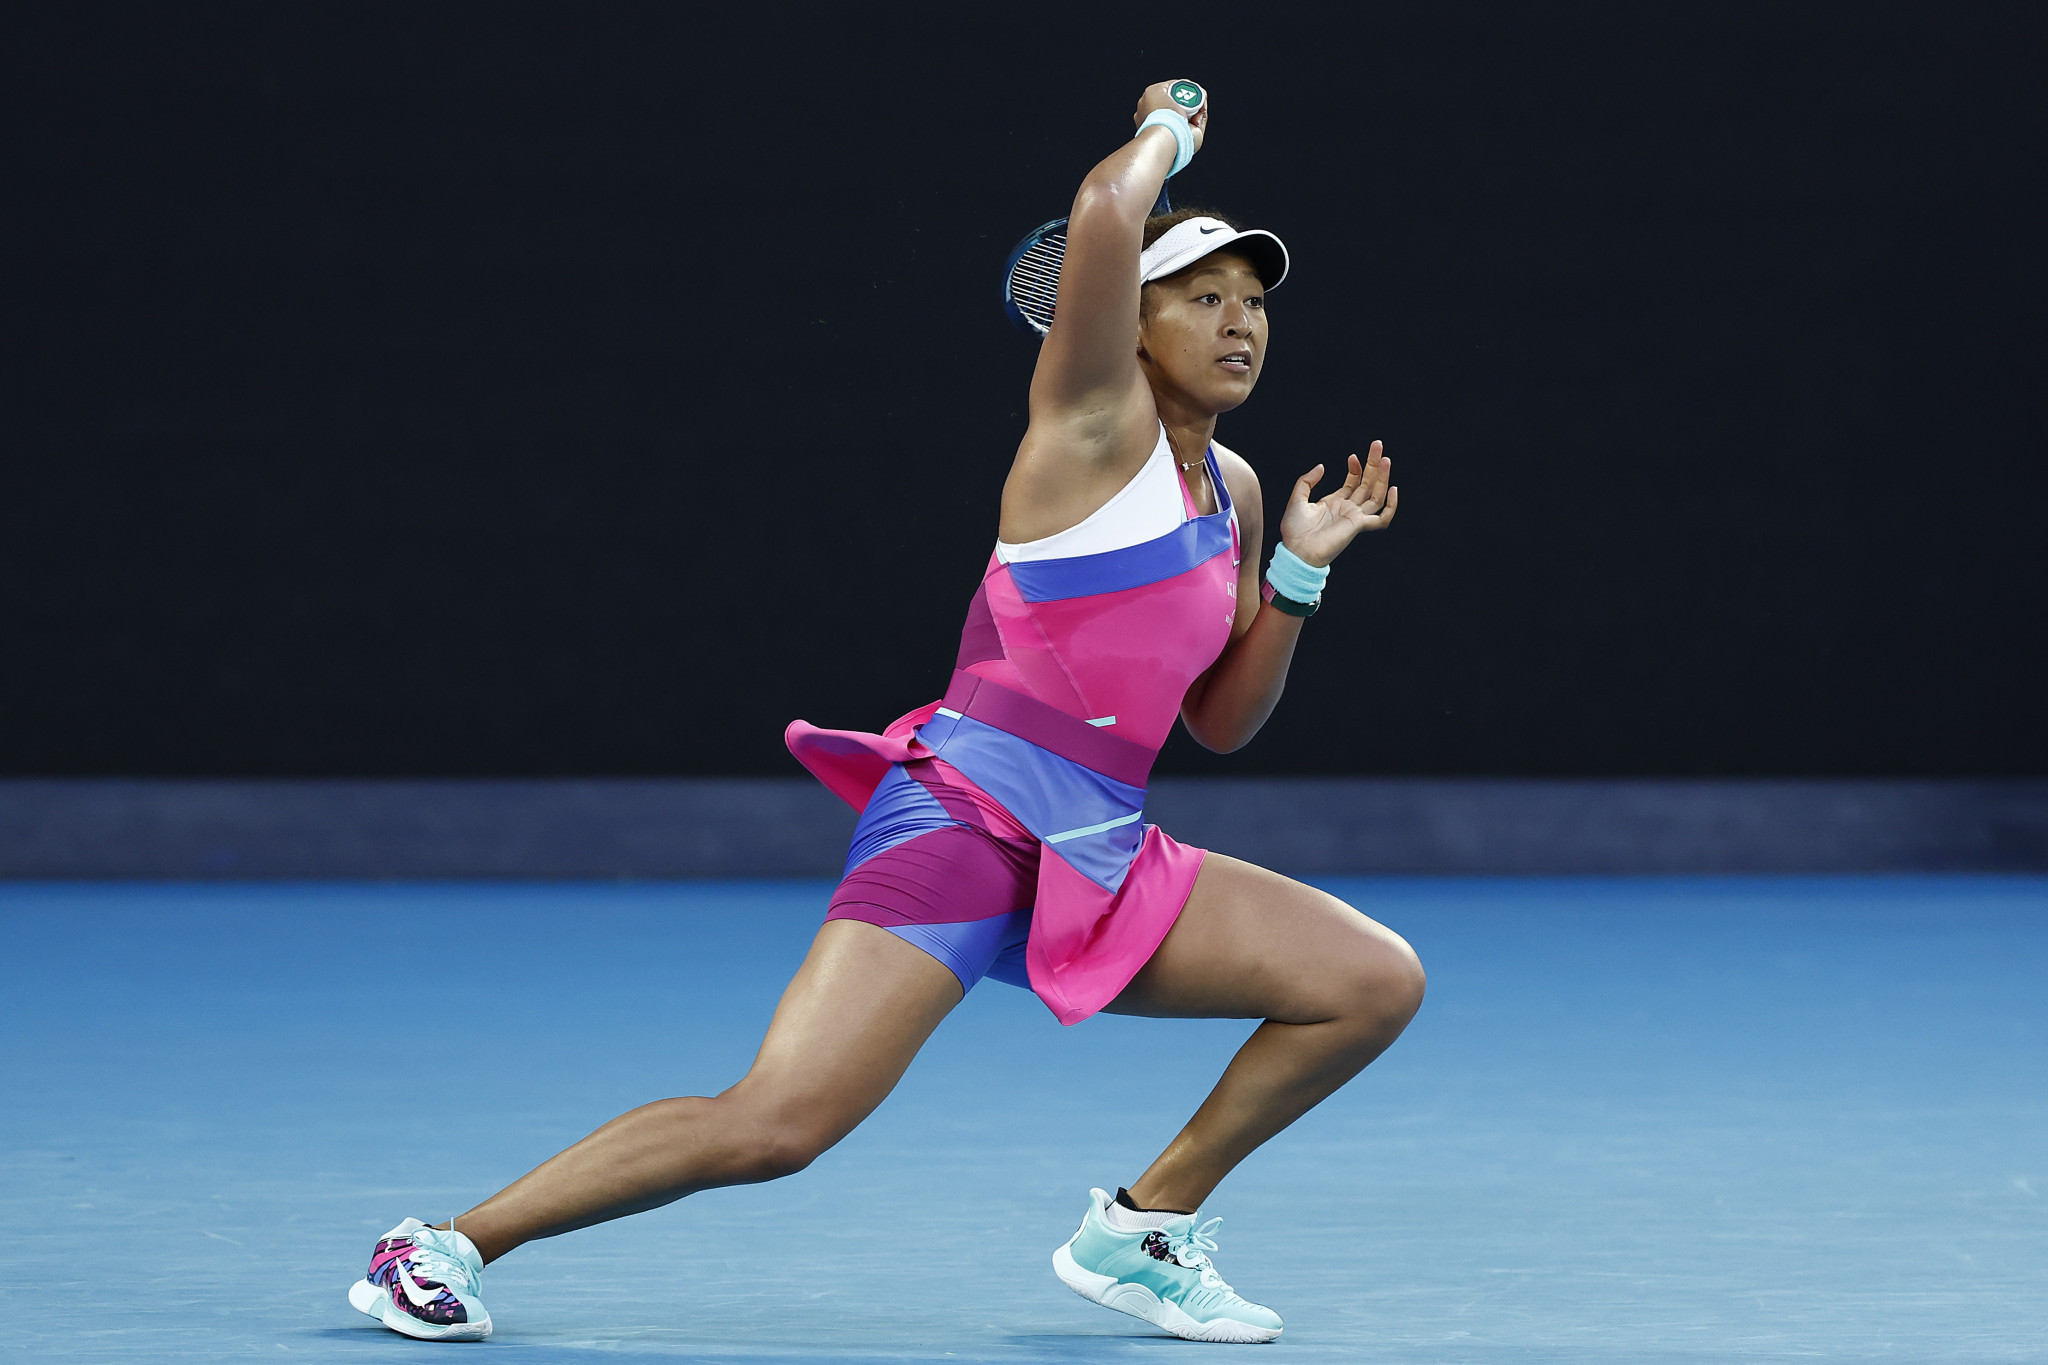 Japan's Naomi Osaka registered another straight-sets win as she looks to defend her women's singles title in Melbourne ©Getty Images